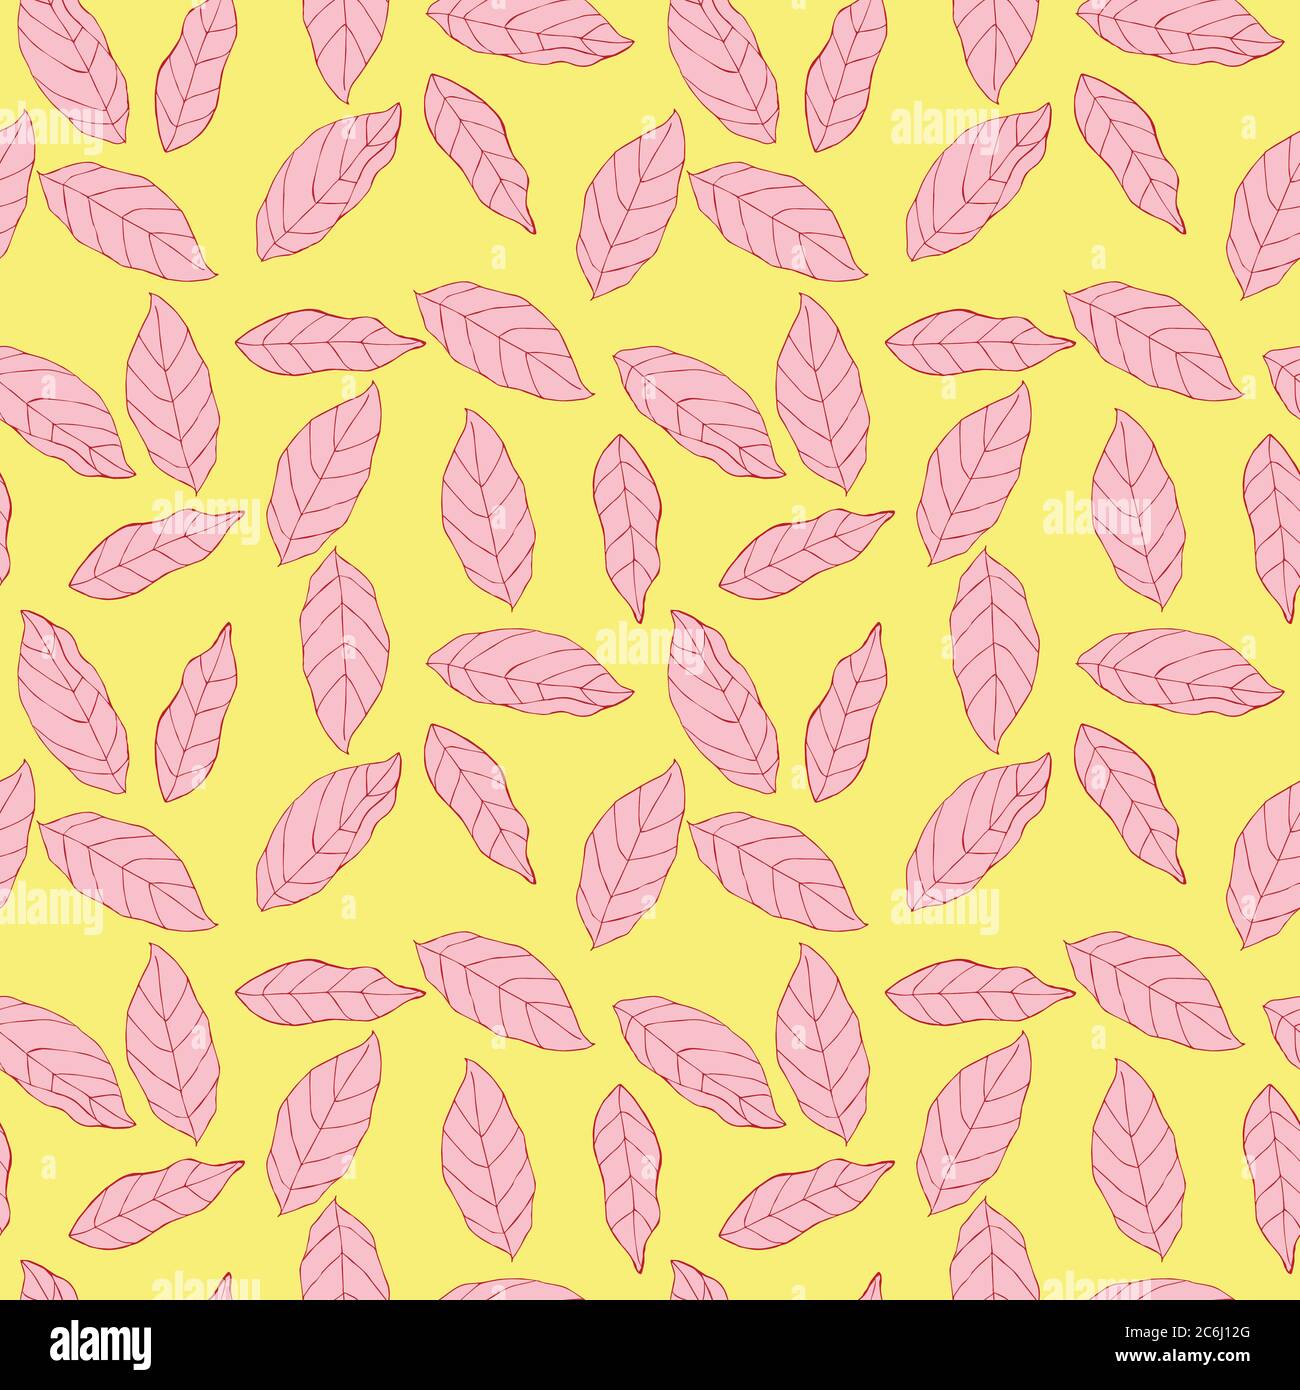 Leaves vector Seamless Pattern design for wallpaper, textile , surface, fashion , background,tile, stationary, home decor, furnishing etc. Stock Photo